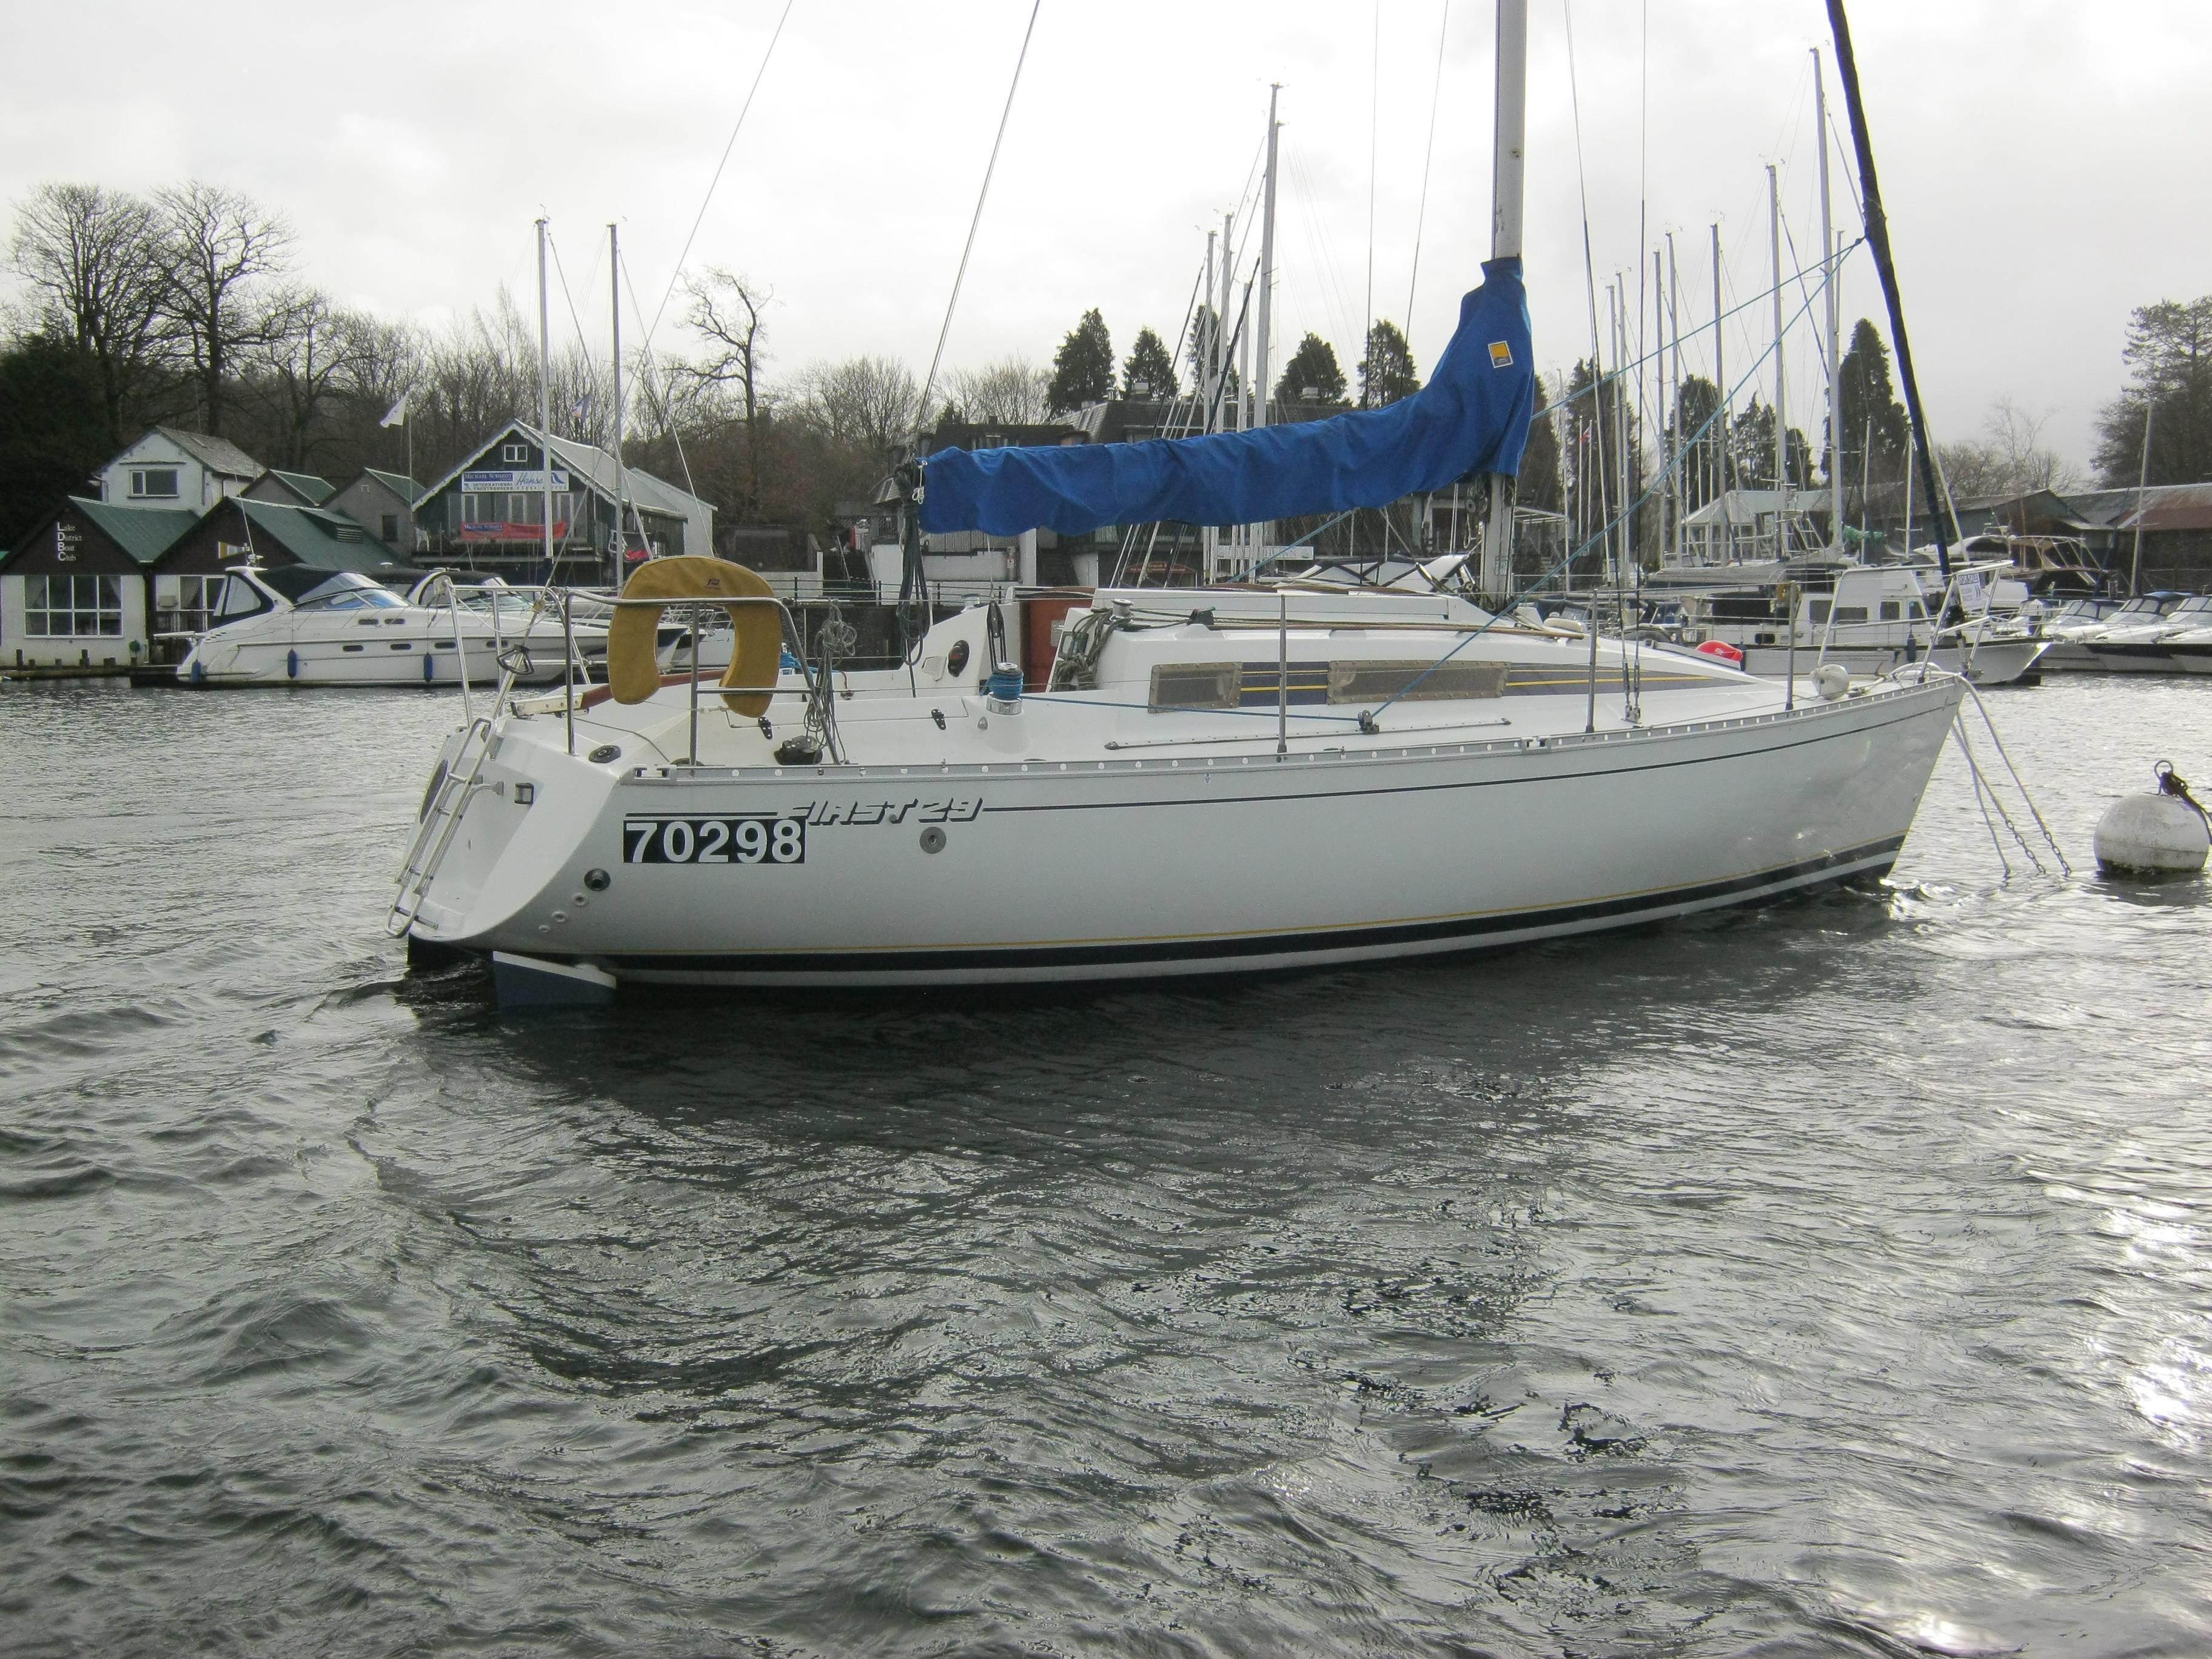 Beneteau First 29, Bowness on Windermere, Cumbria